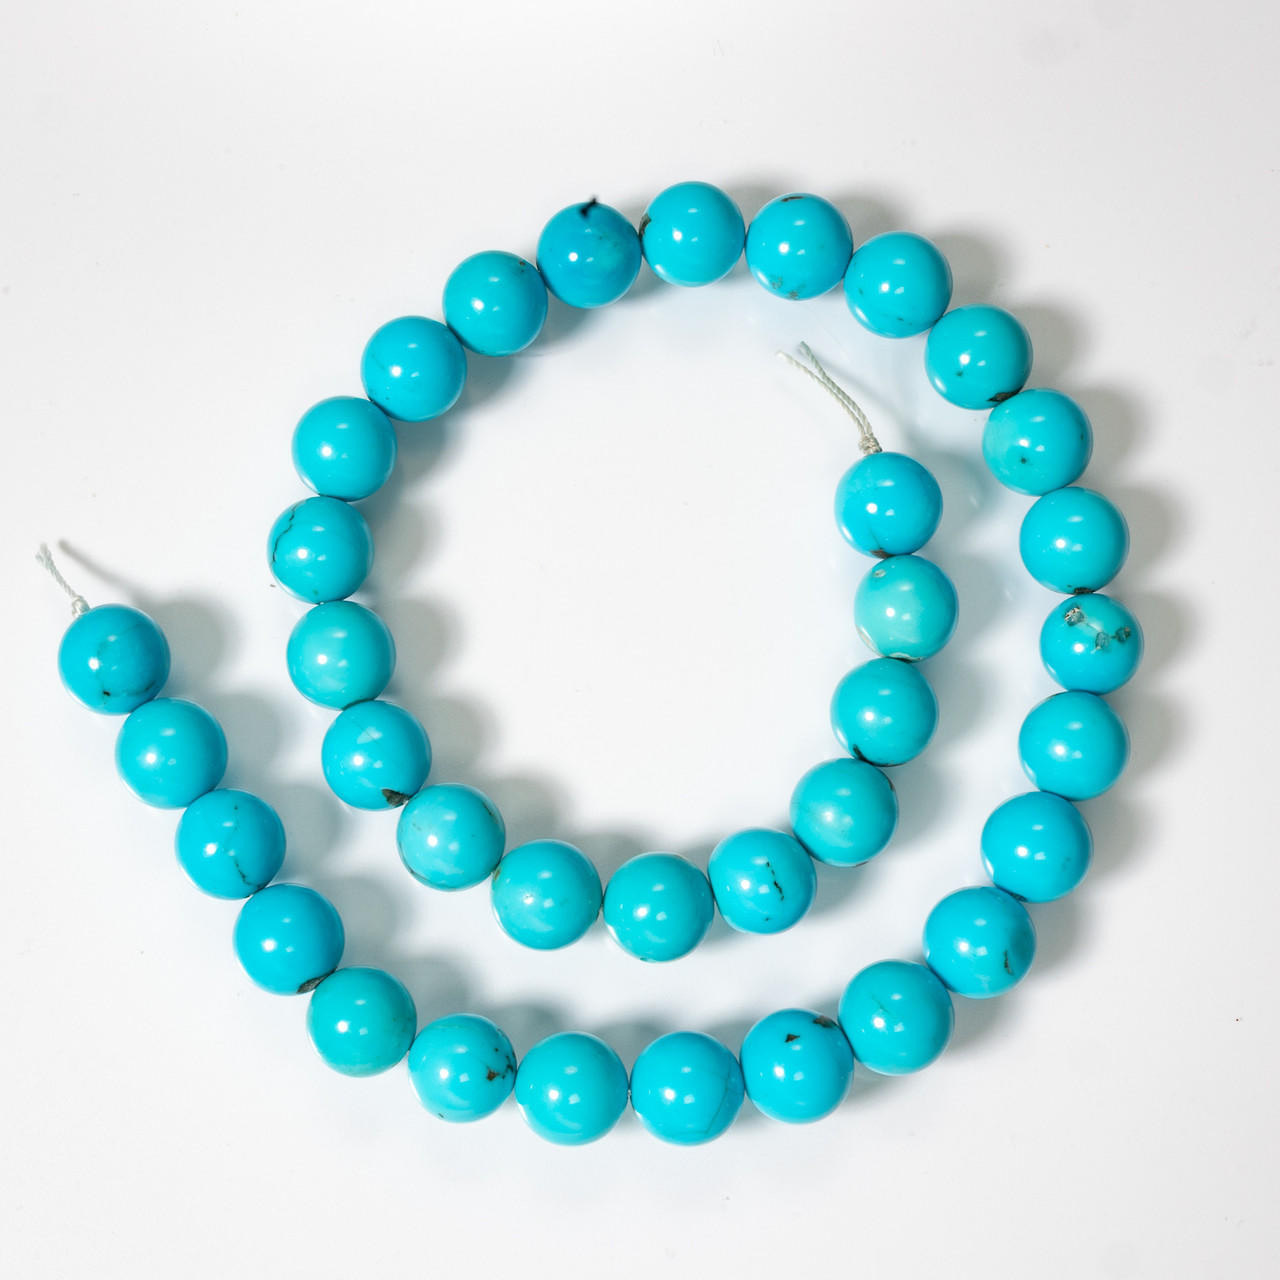  Sleeping Beauty Turquoise-12mm Rounds SB12a3 